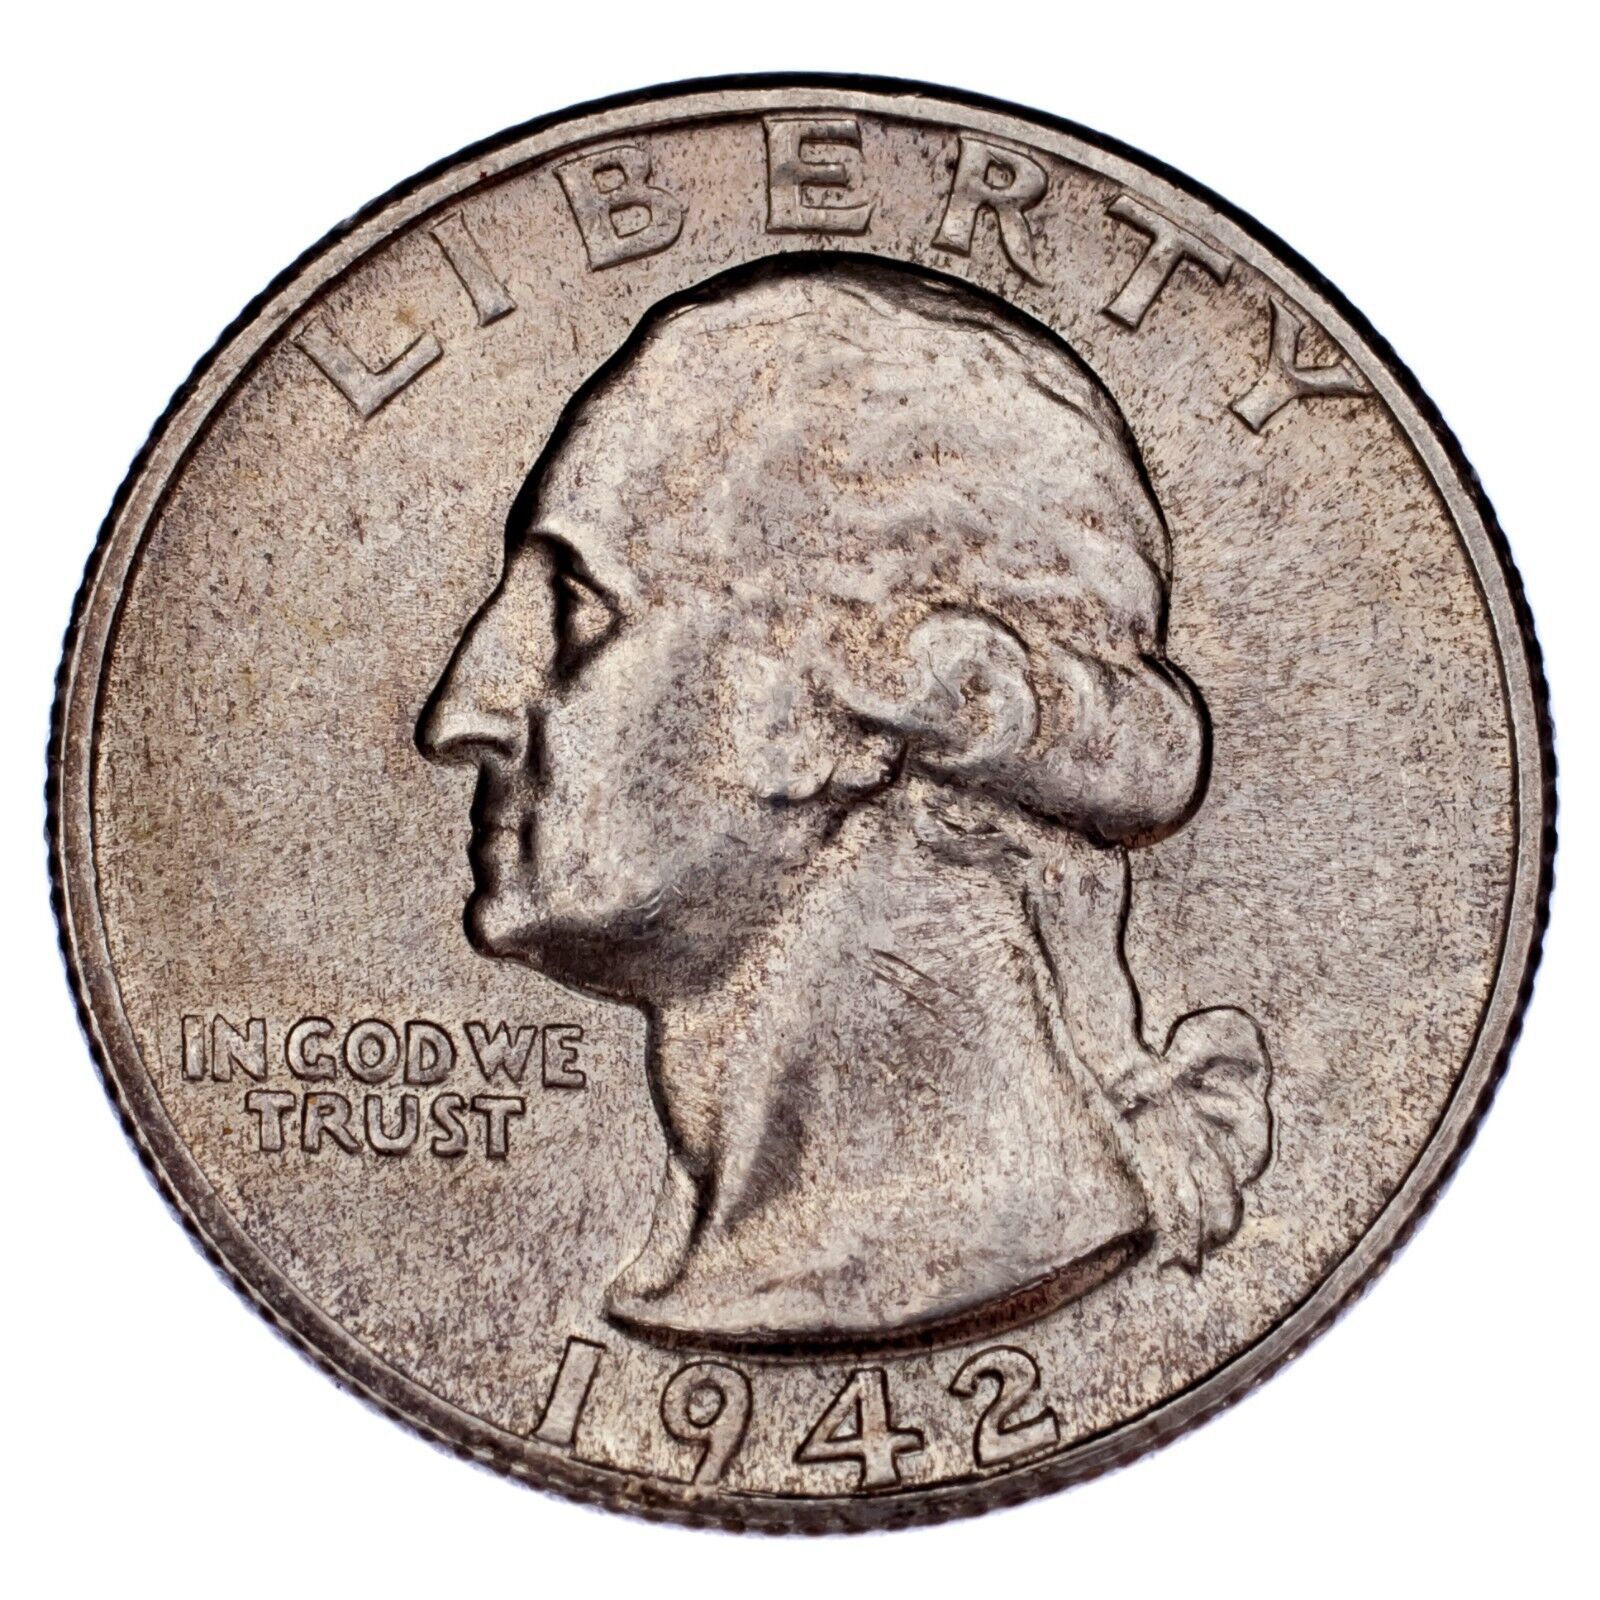 Primary image for 1942-S 25C Washington Quarter Choice BU, Excellent Eye Appeal, Full Mint Luster